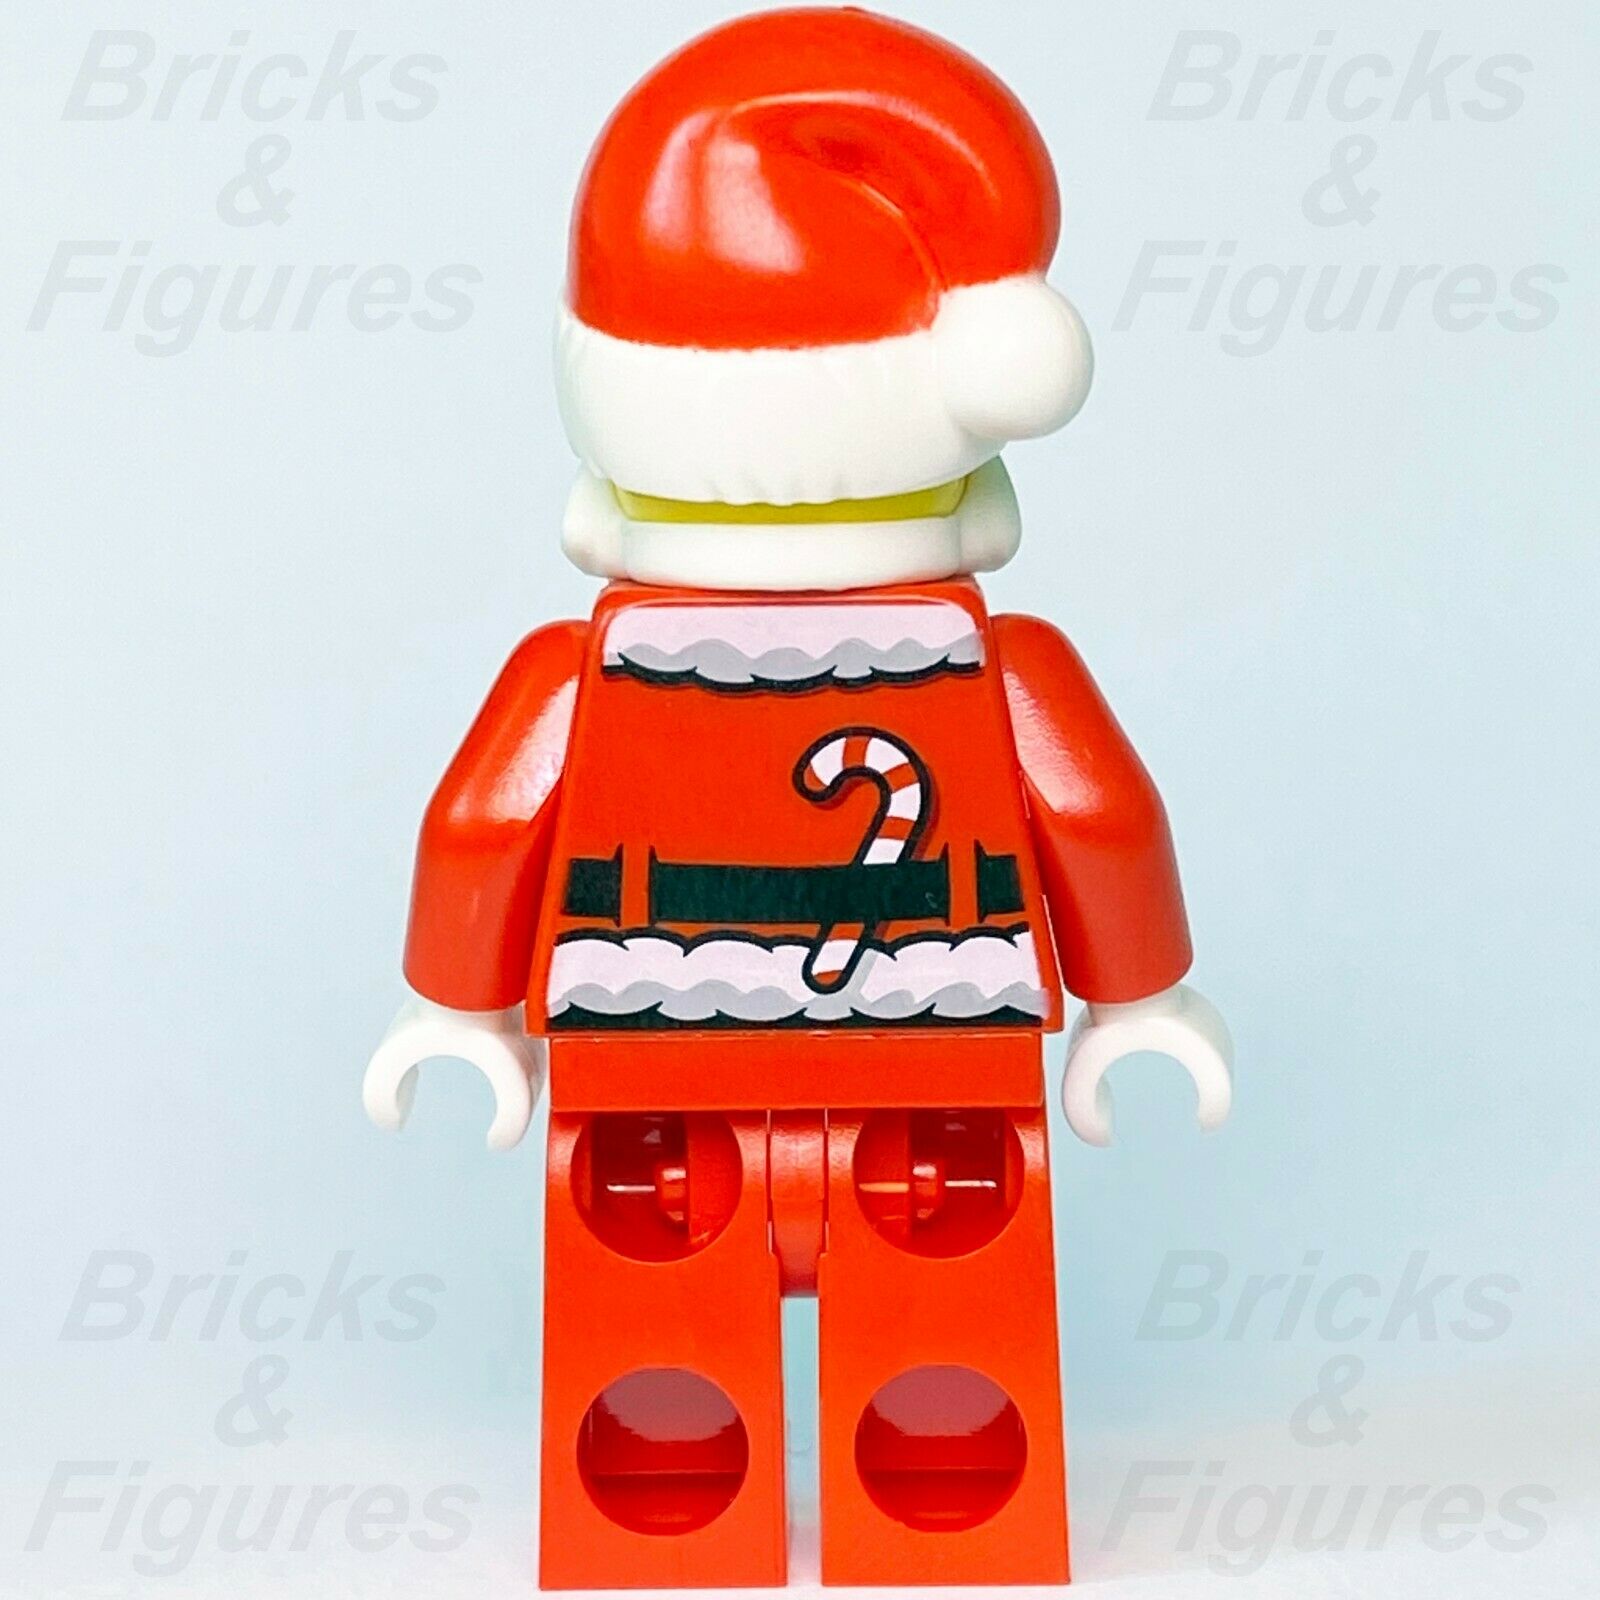 Town Holiday & Event LEGO Santa Claus Father Christmas from sets 60155 60235 - Bricks & Figures